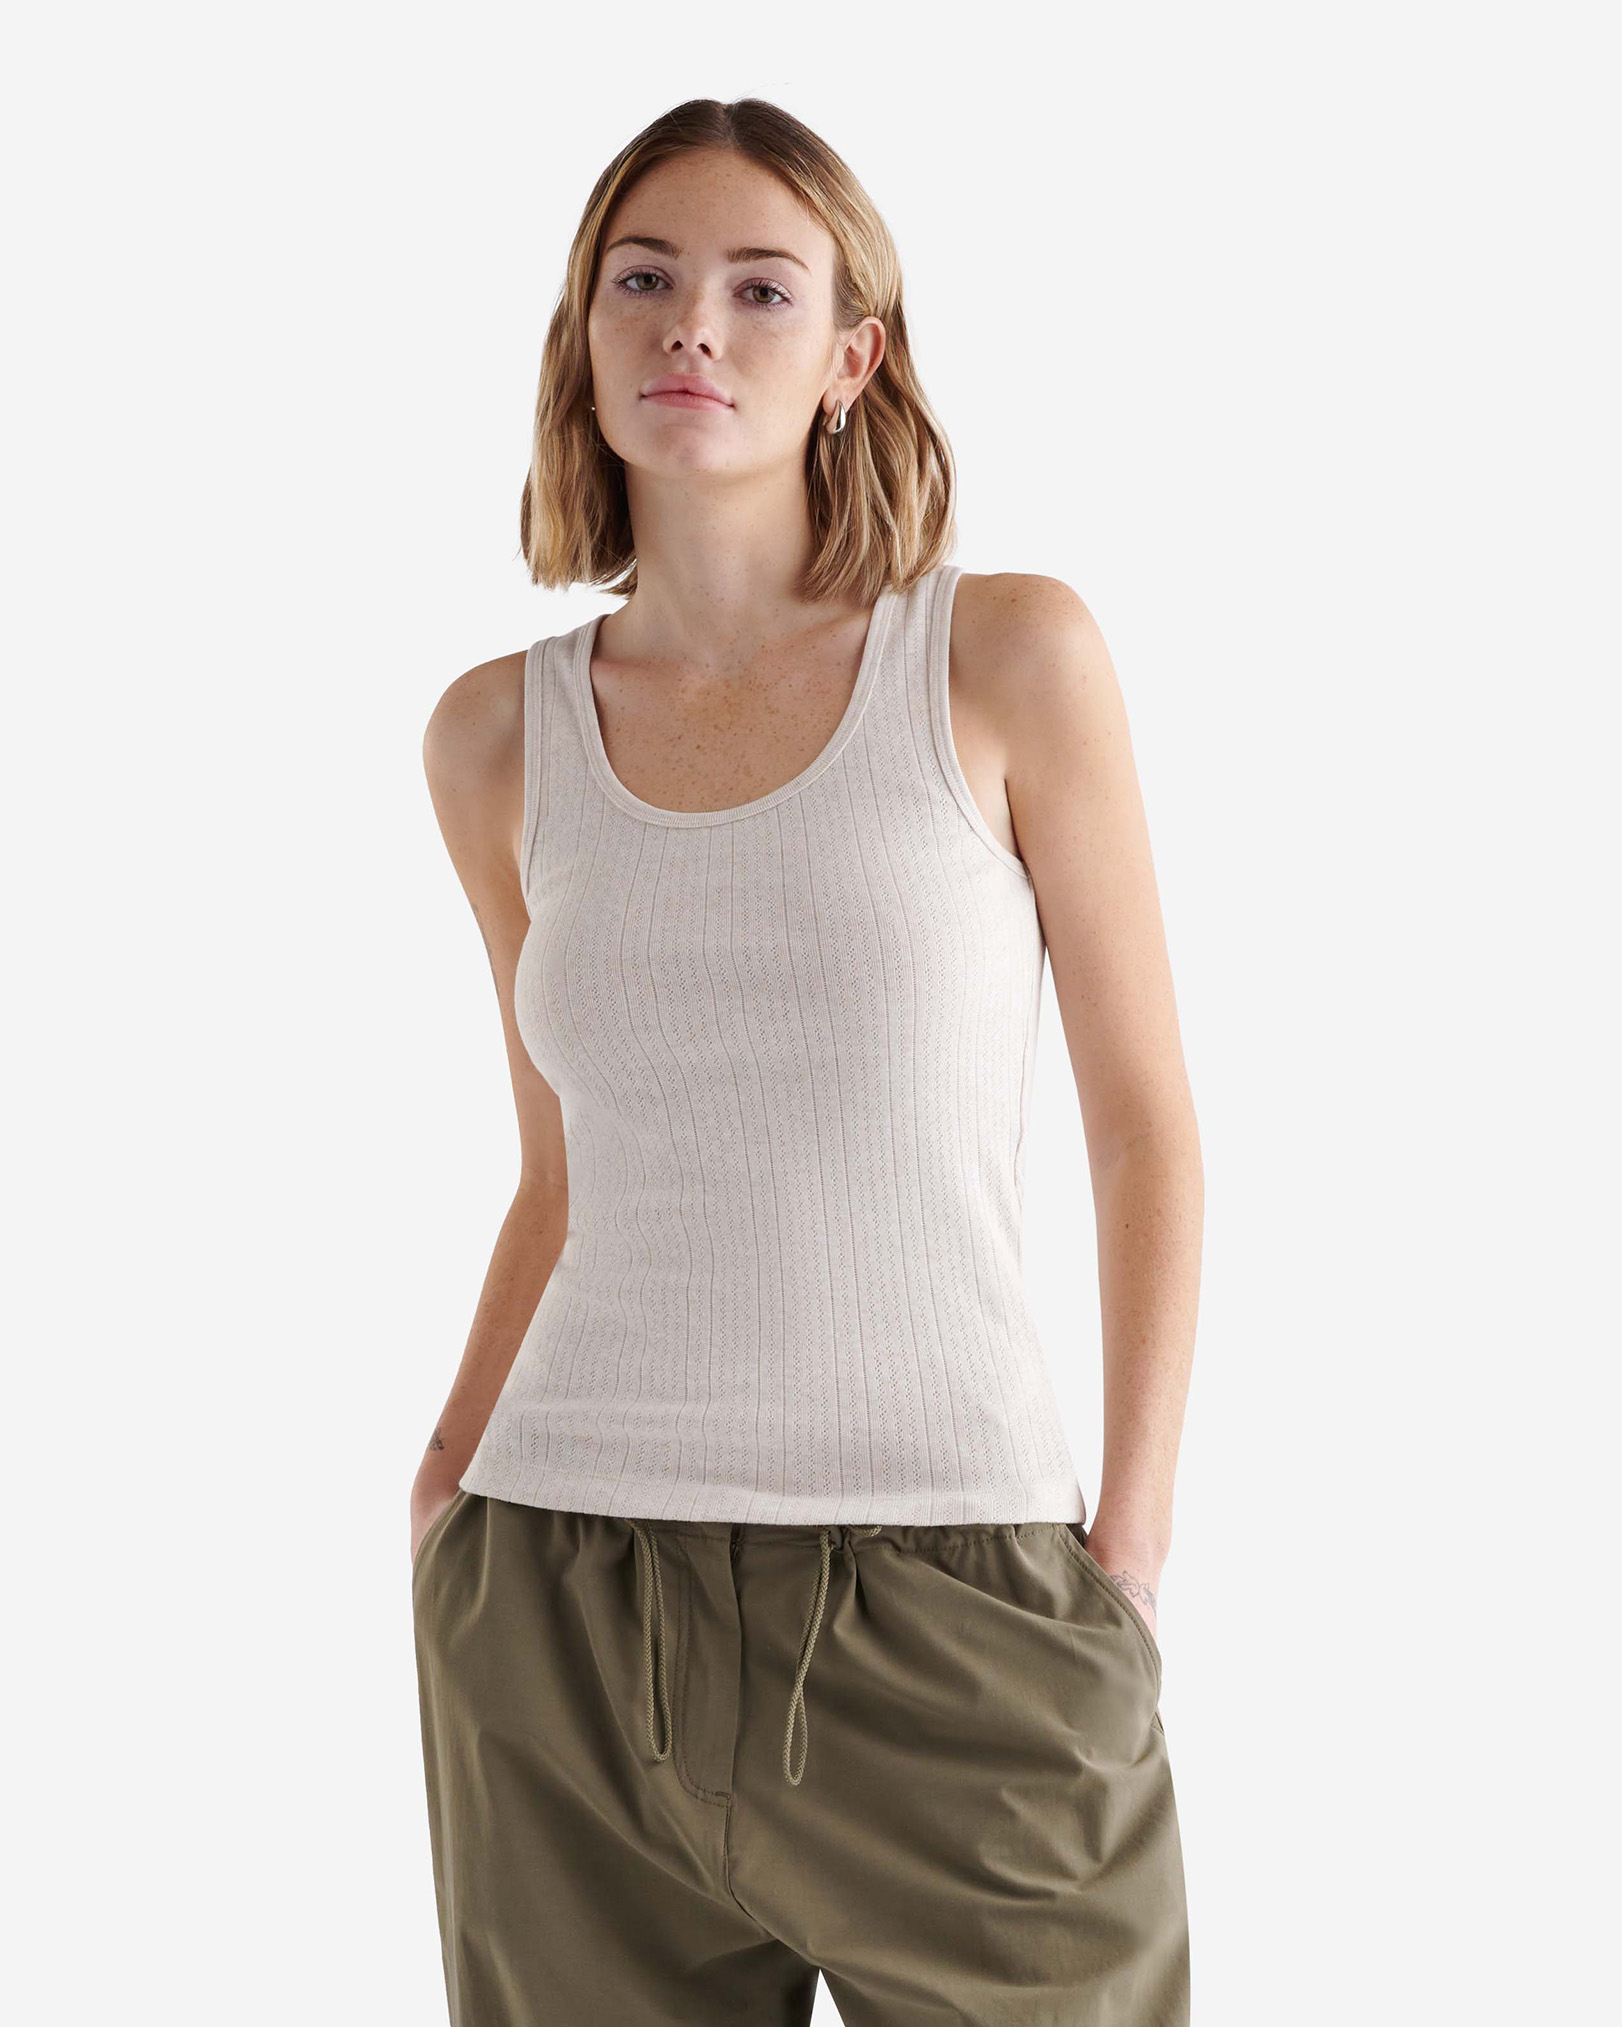 Roots Pointelle Scoop Neck Tank Top in Oatmeal Mix